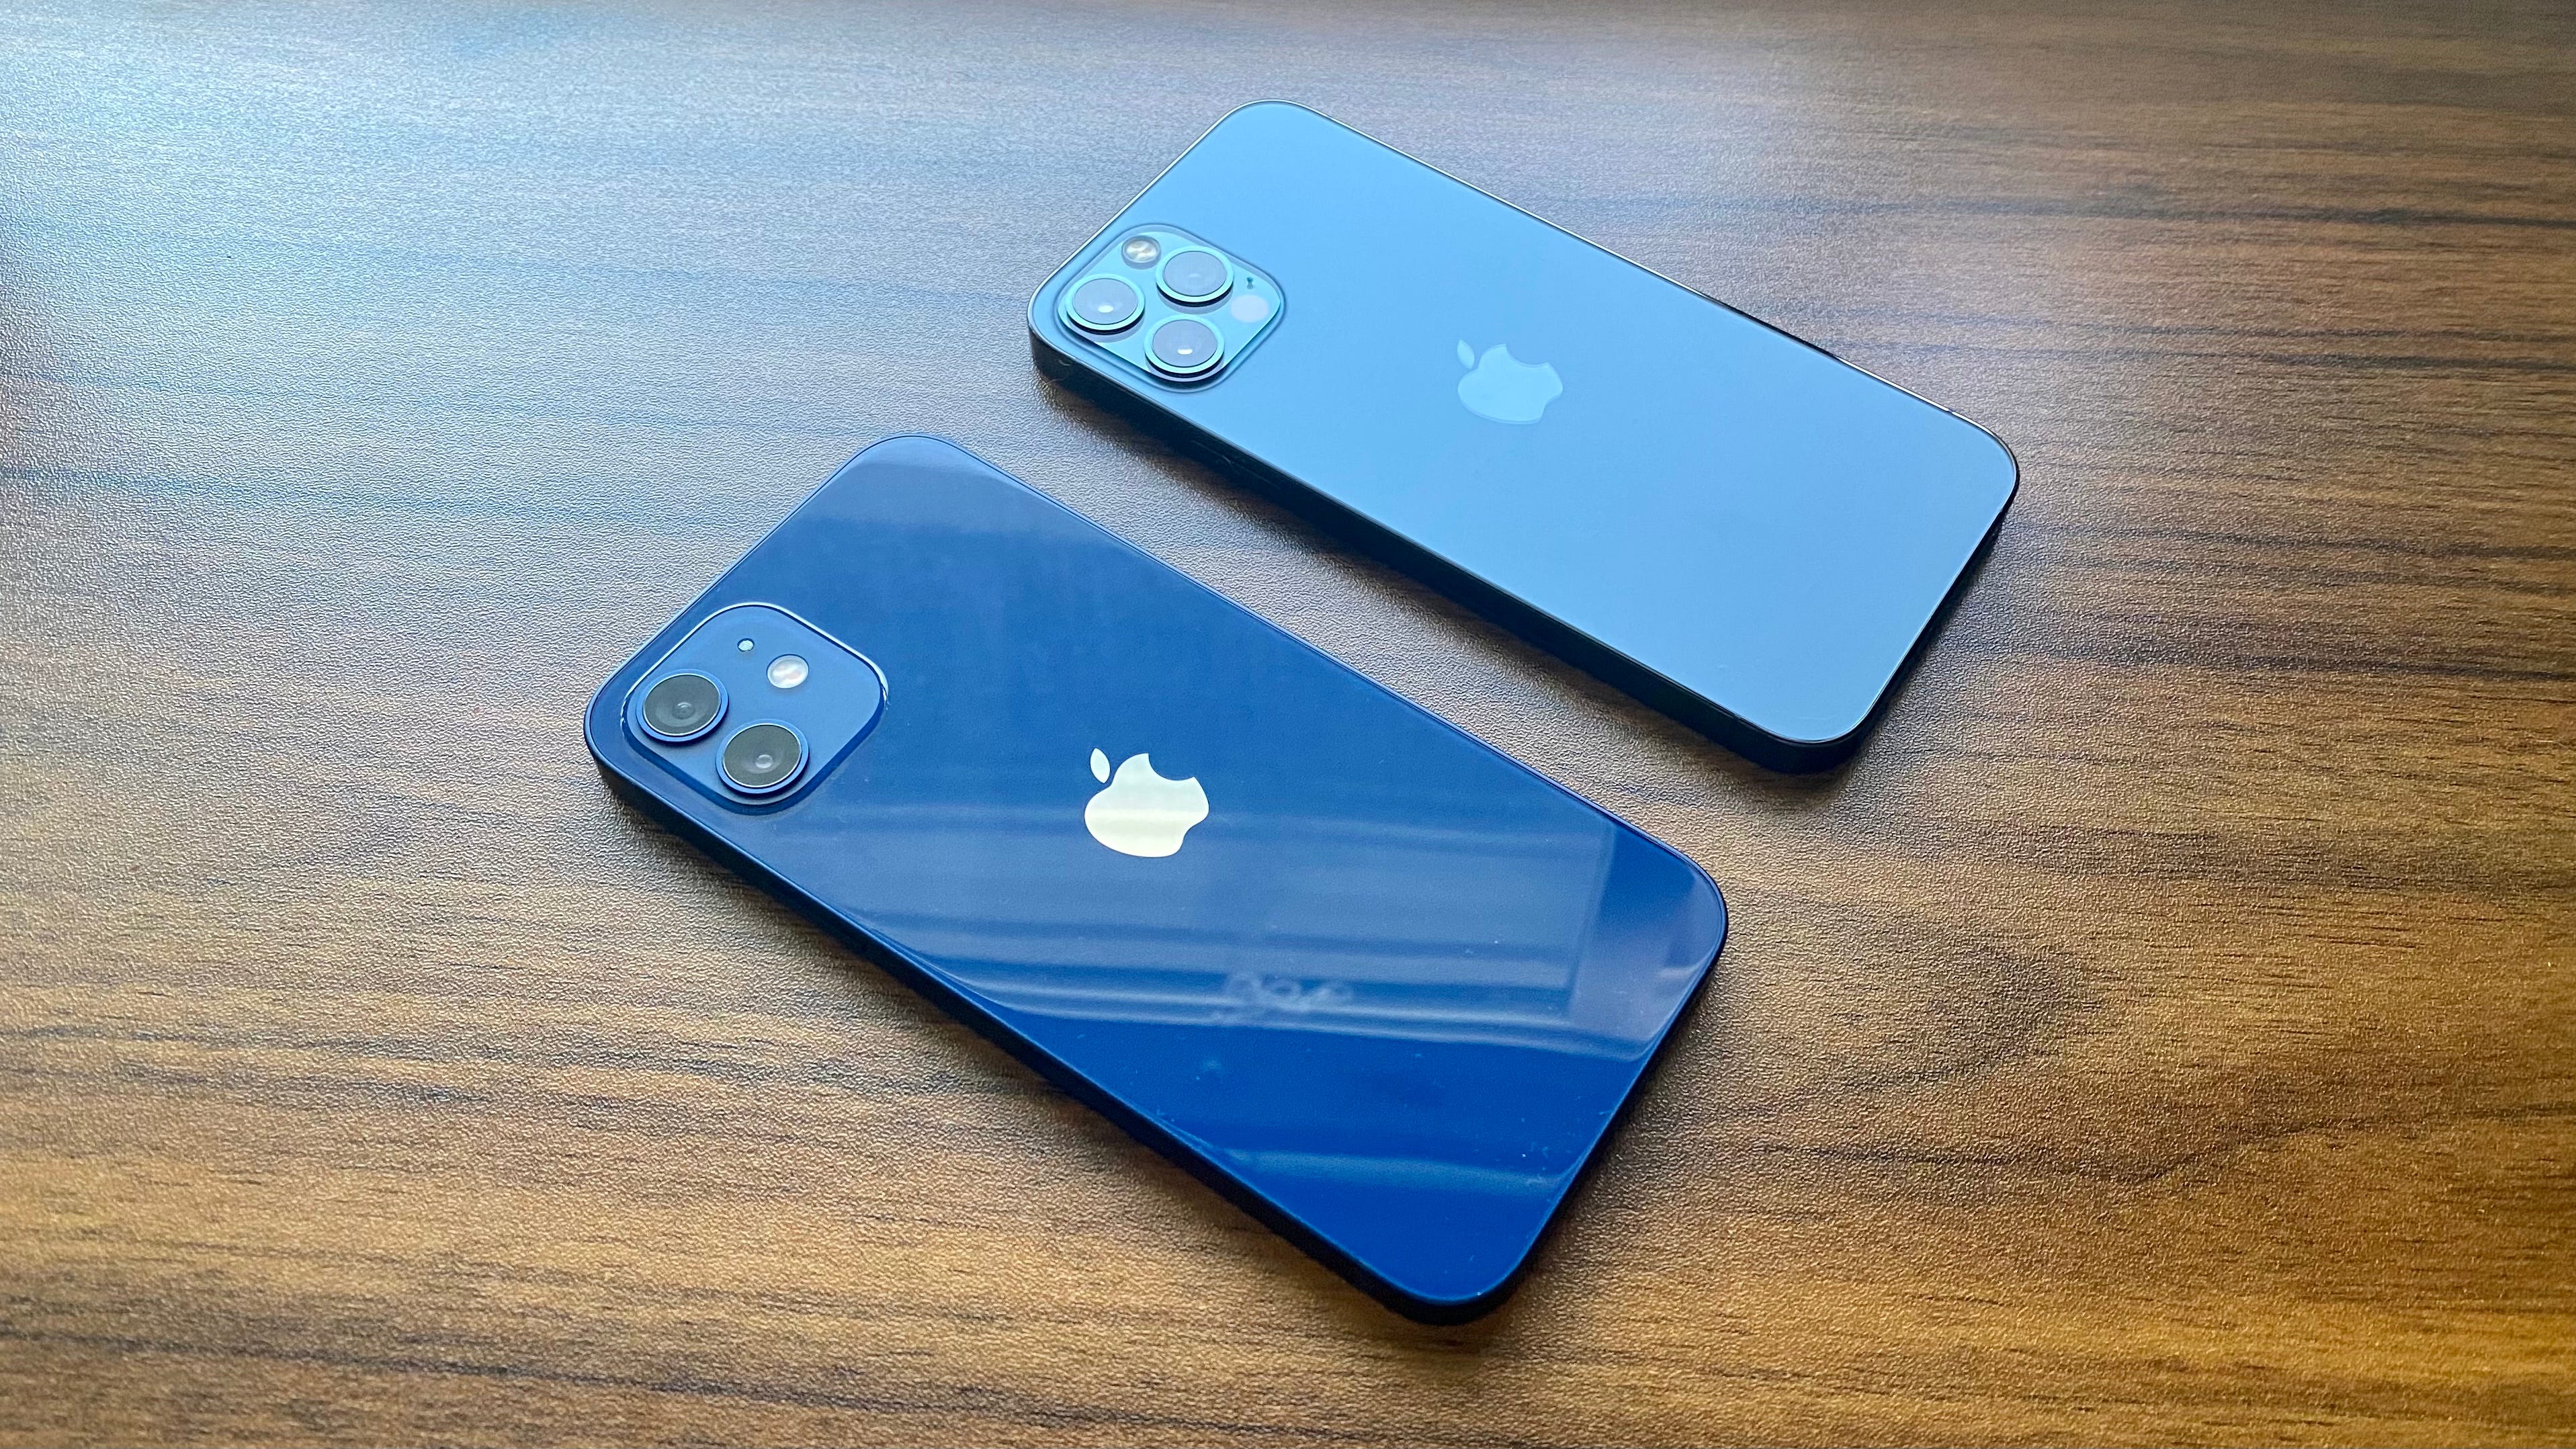 Iphone 12 Review Feeling Blue An Iphone Choice Based On Color Or By Paul Alvarez Techuisite